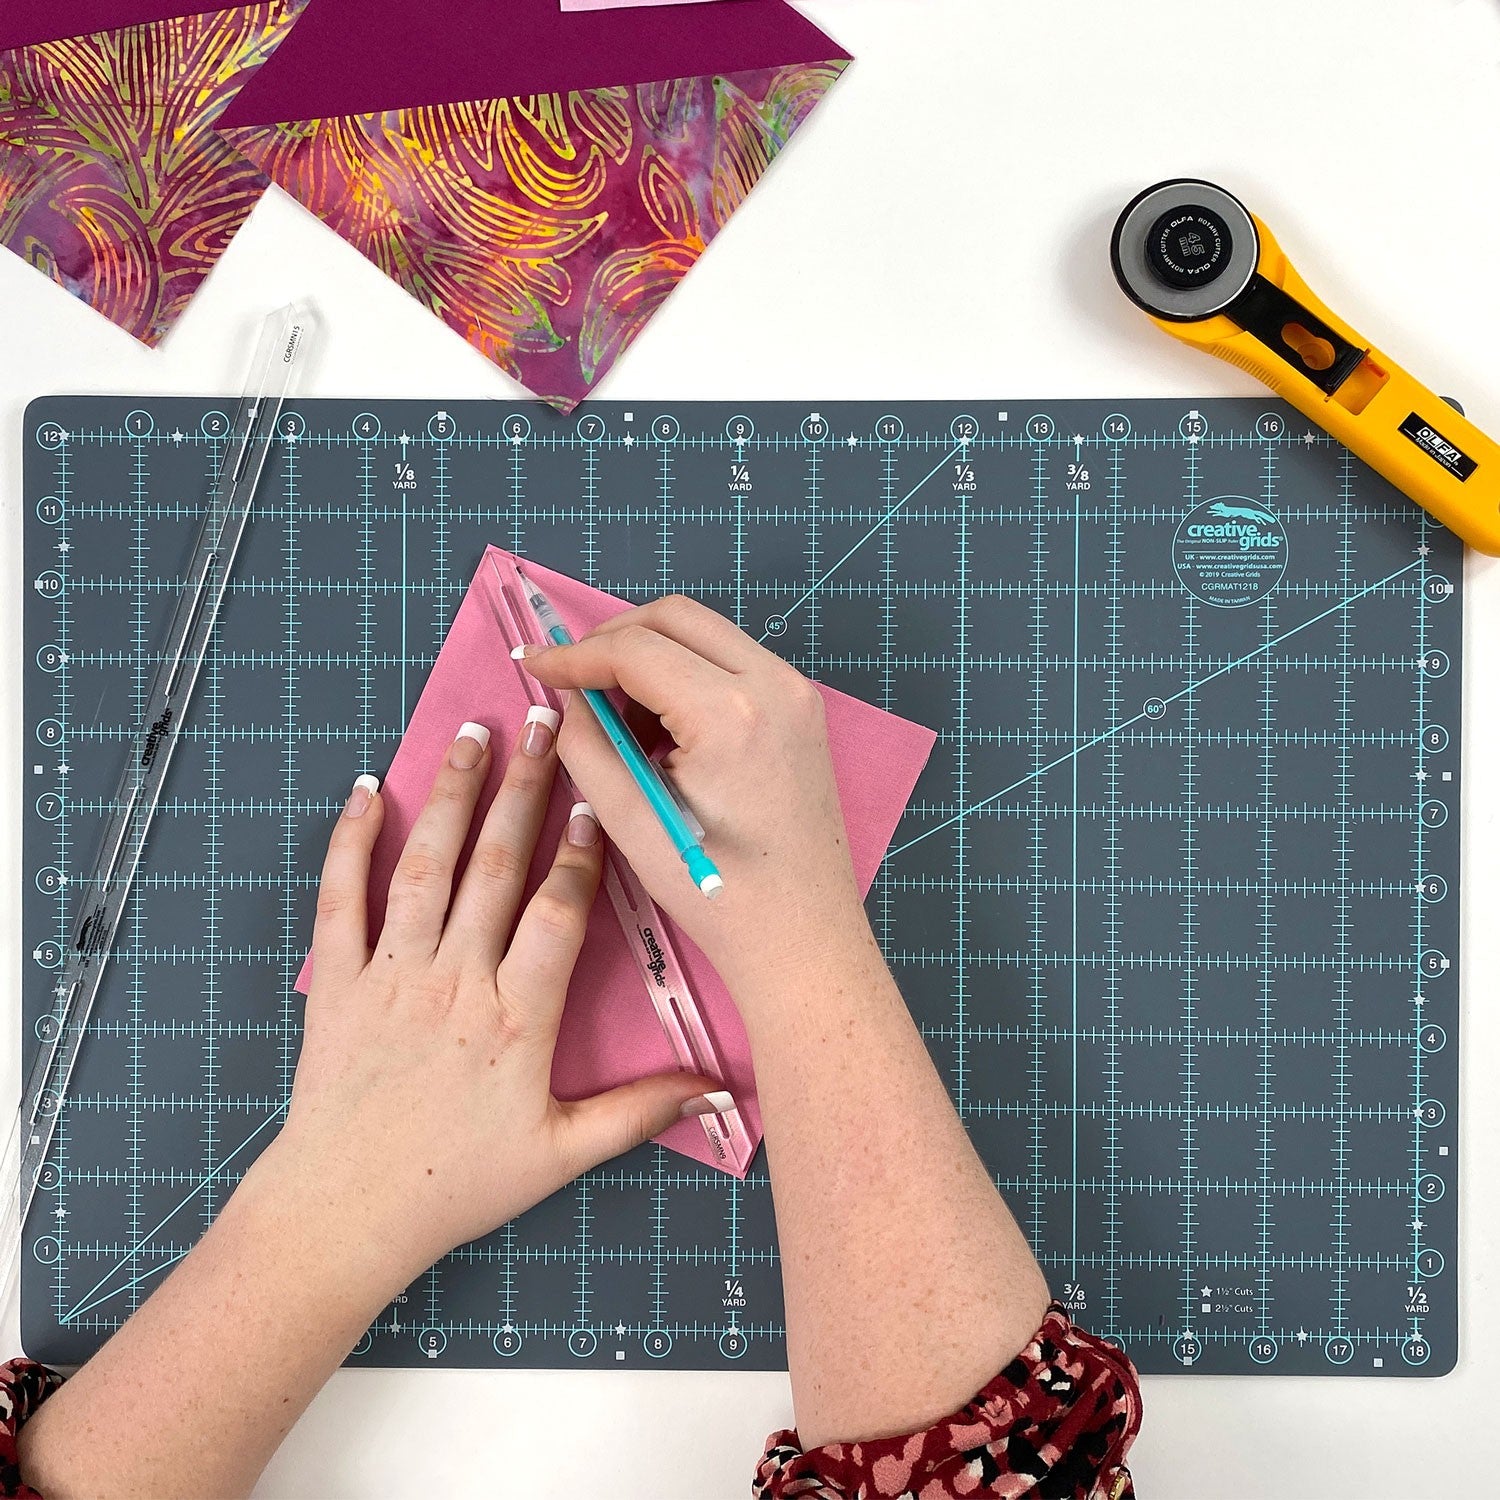 Marking seam lines on fabric square with a Creative Grids 9-inch Seam Guide and Marking Quilt Tool